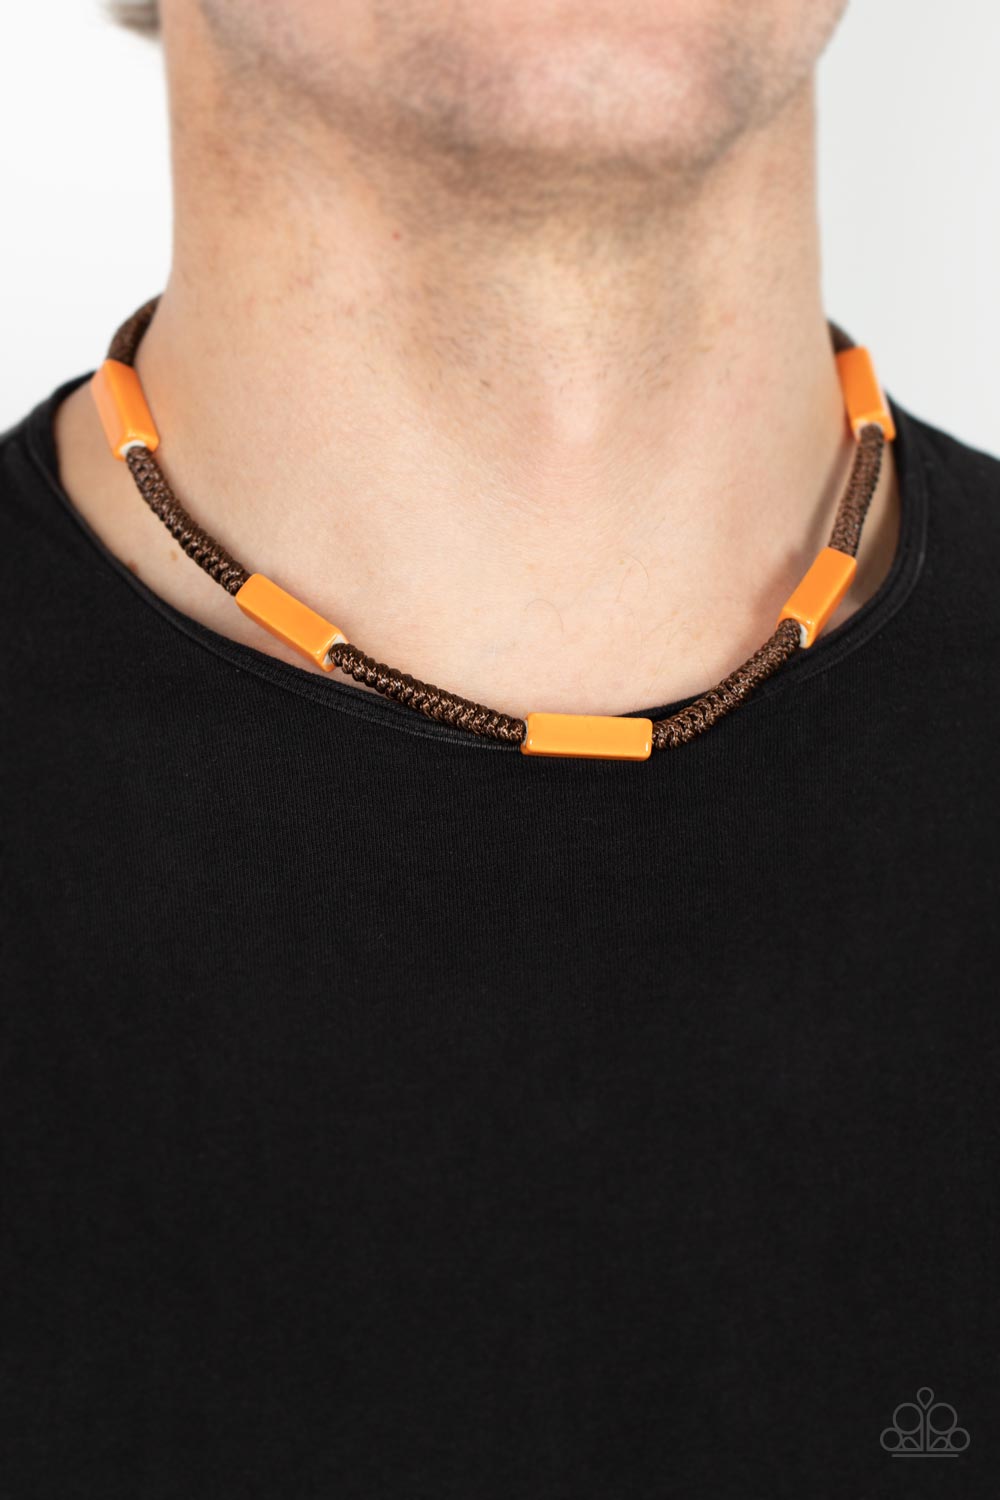 Paparazzi Tropical Tycoon Orange Necklace. Subscribe & Save. Men’s Urban Accessories. $5 Necklace